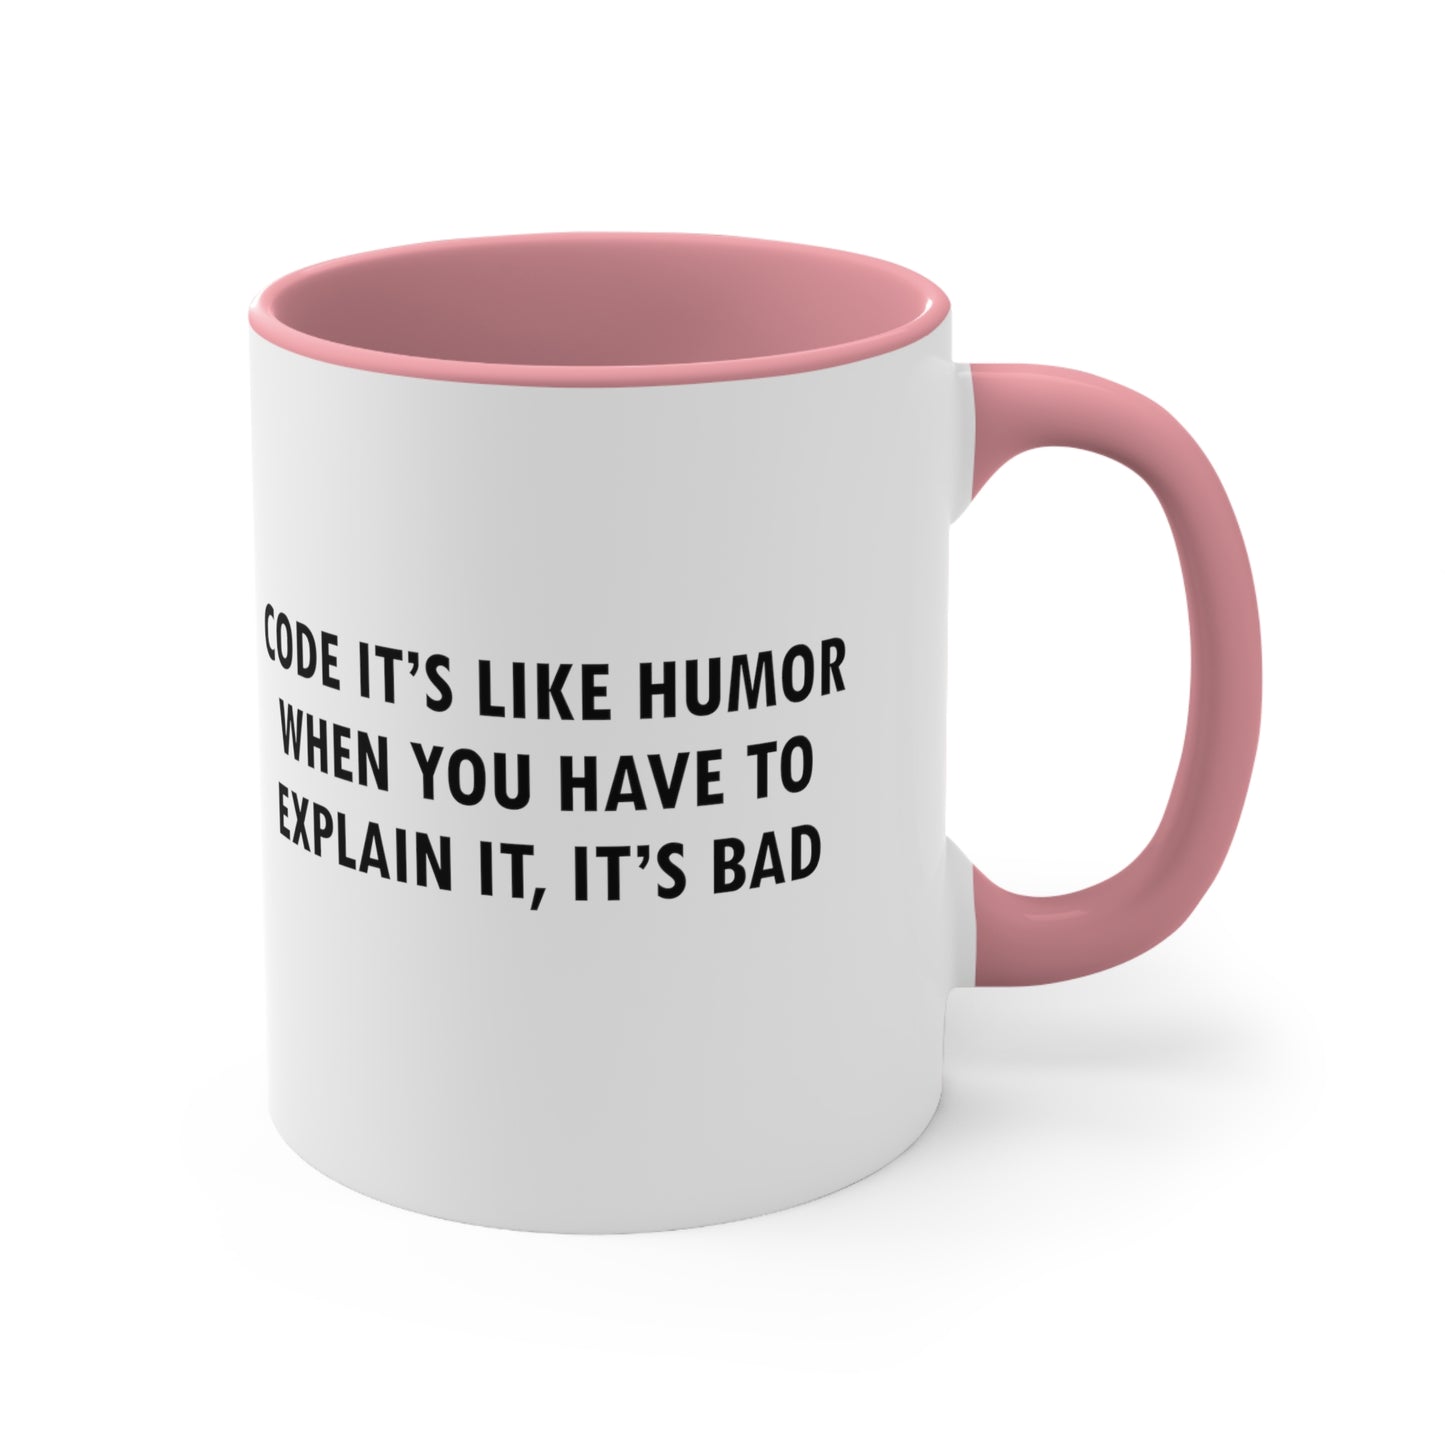 Humor Programming IT for Computer Security Hackers Accent Coffee Mug 11oz